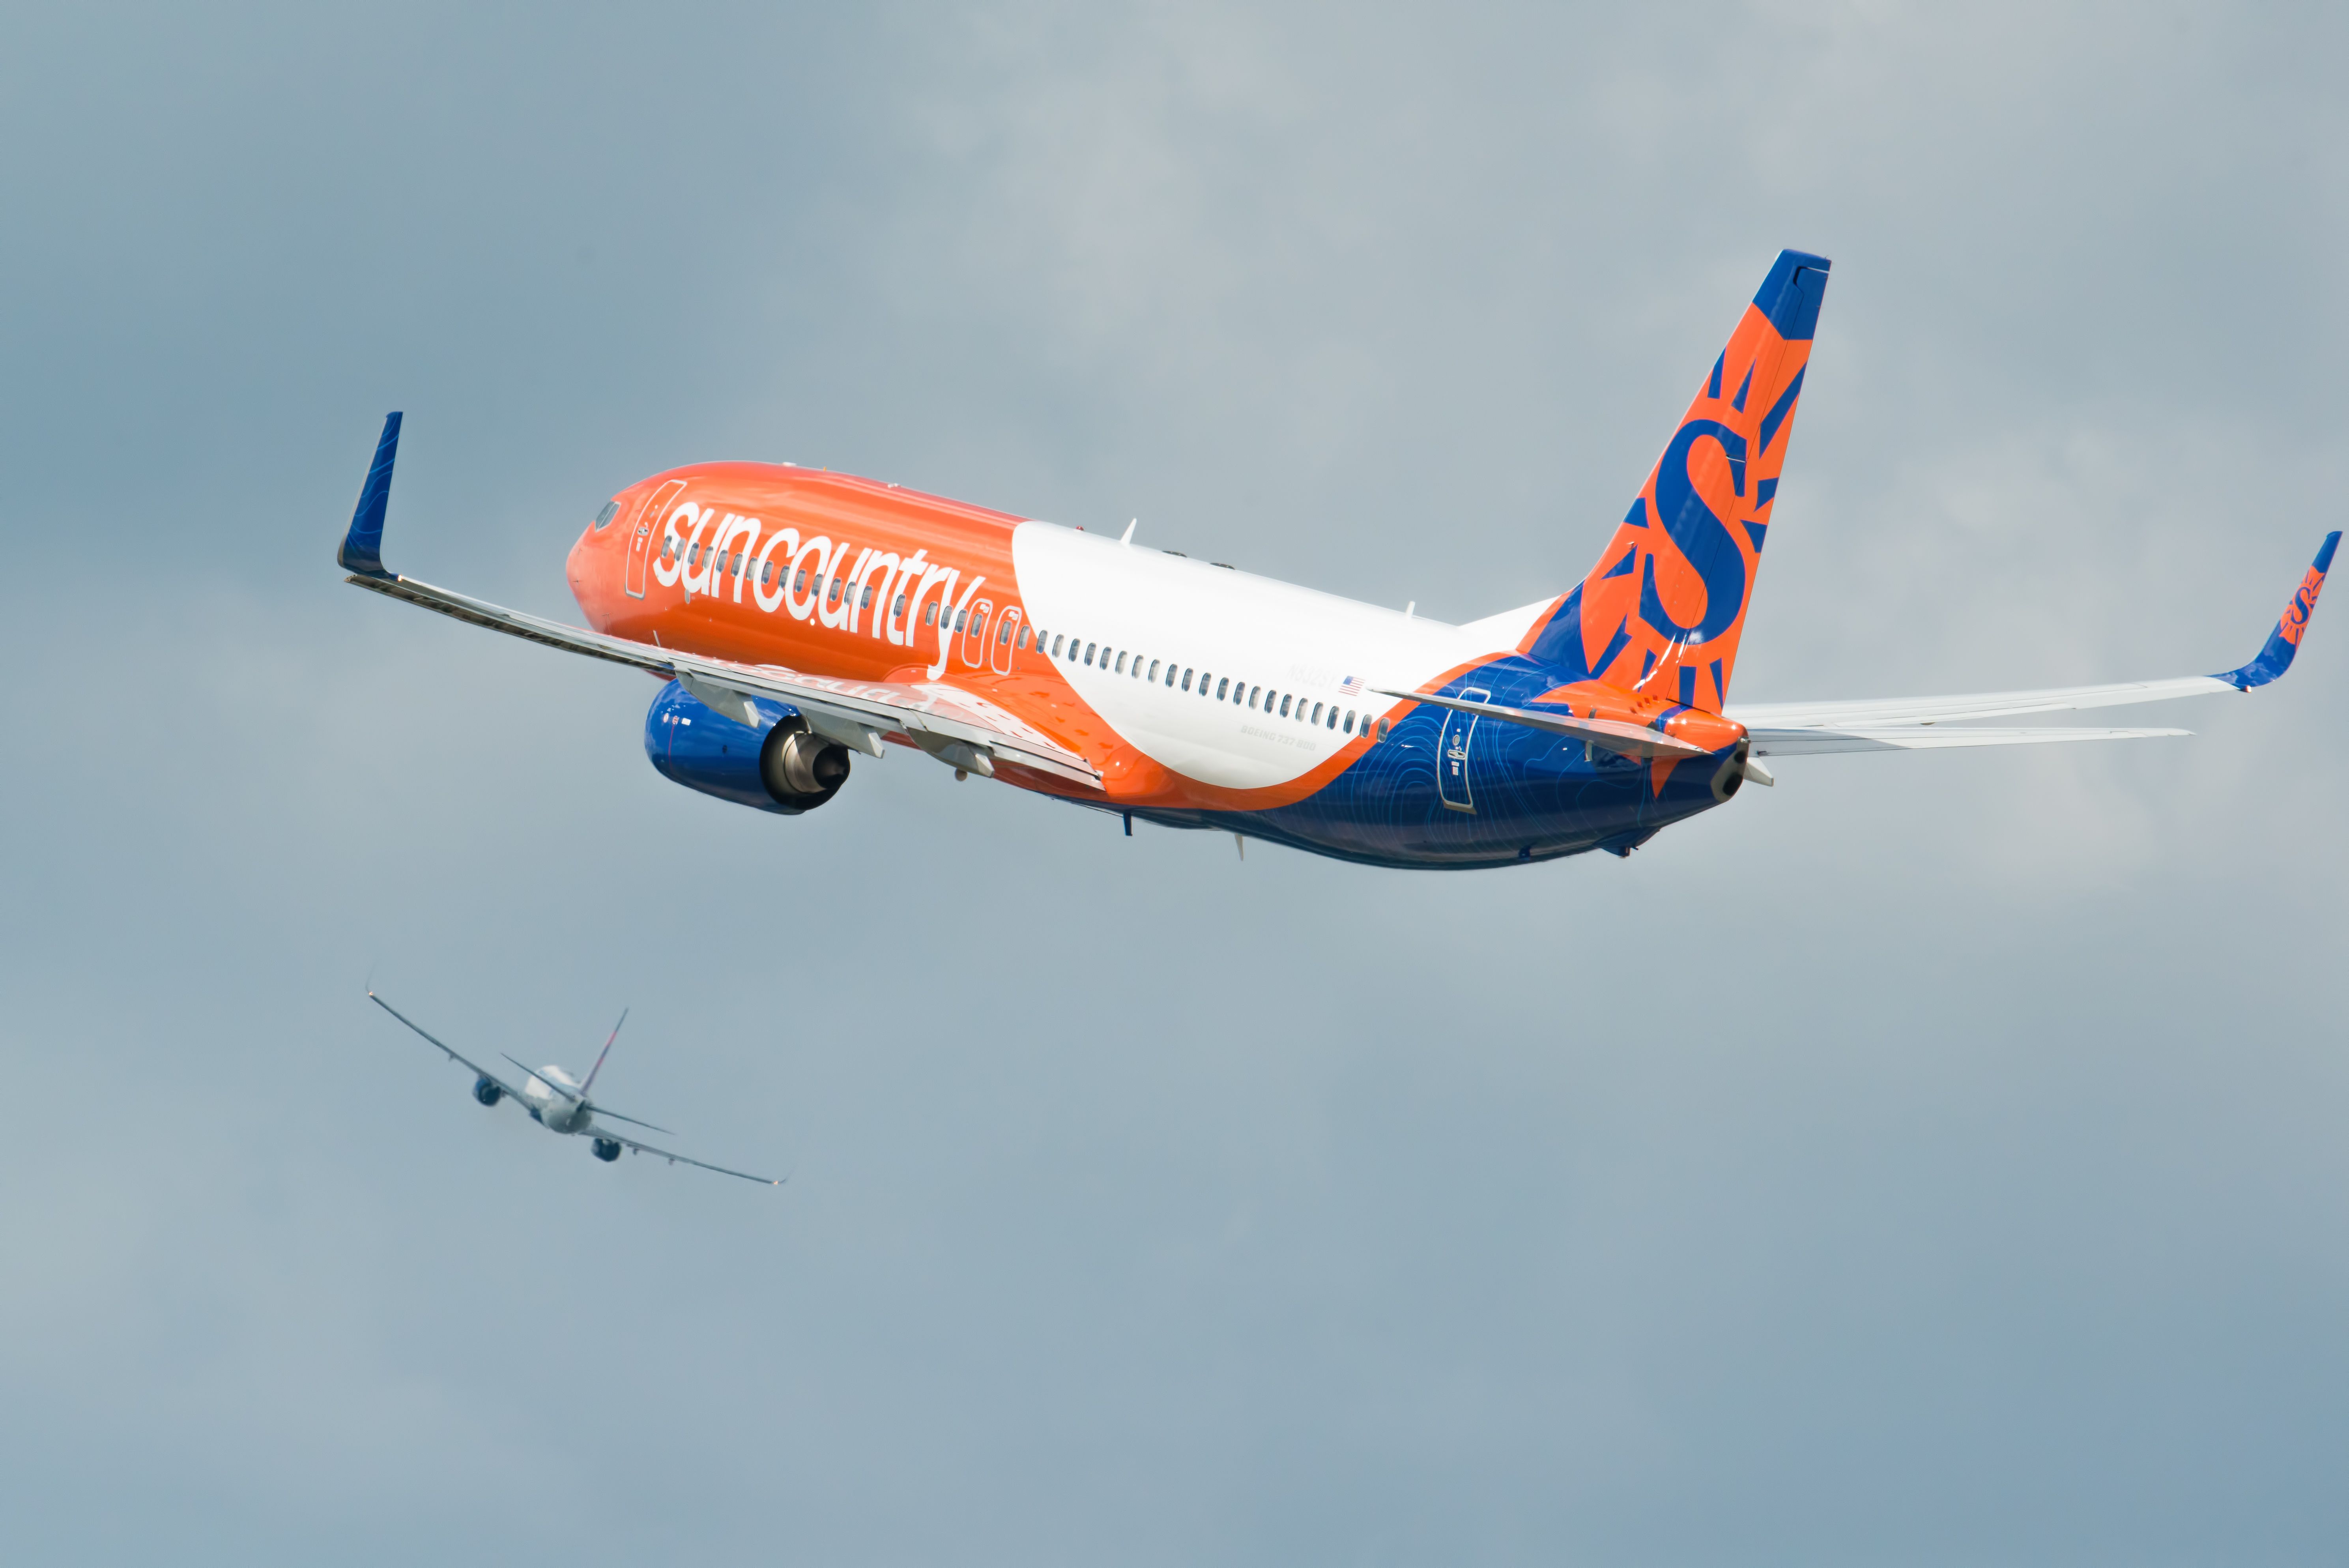 A Sun Country Airlines aircraft 